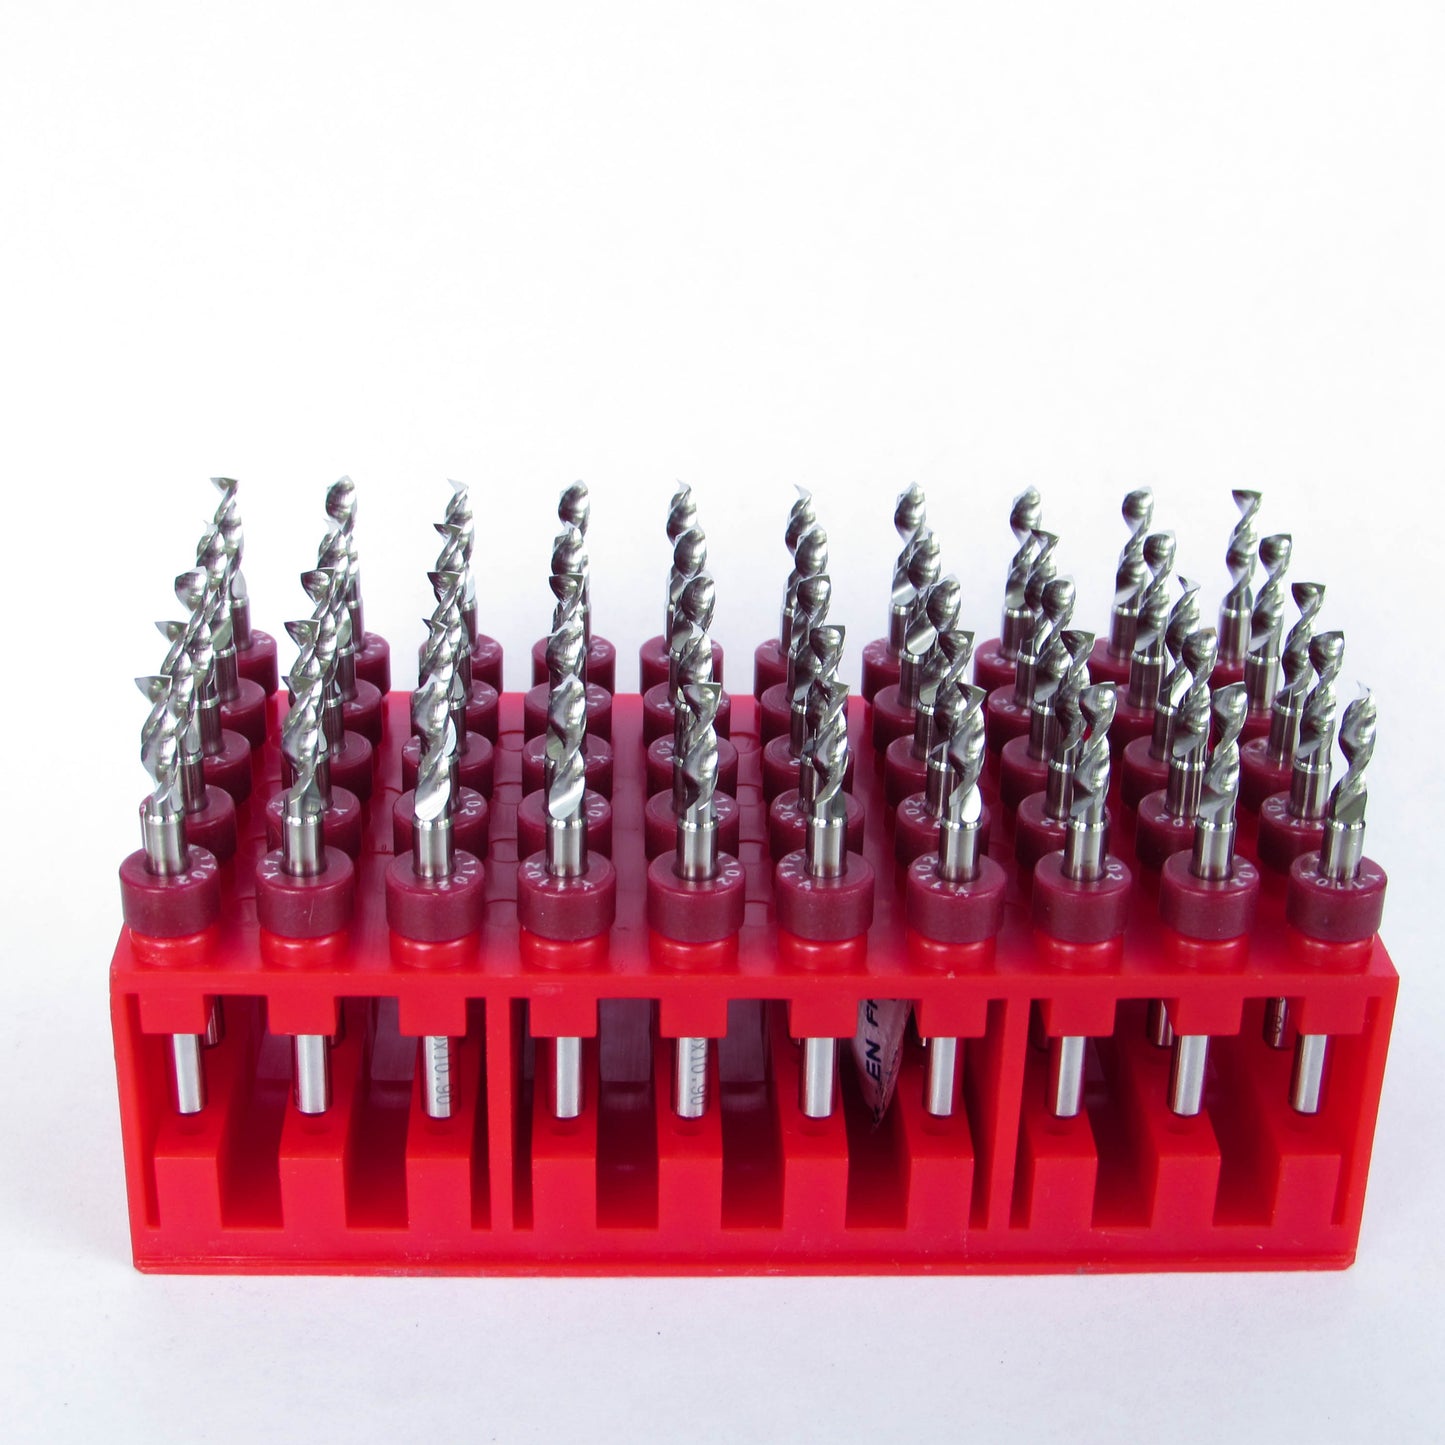 Bulk Lightly Used Drills - 50 Piece Boxes - Super Value for Hobby, Prototyping and Light Industrial Use - Choose the Size...